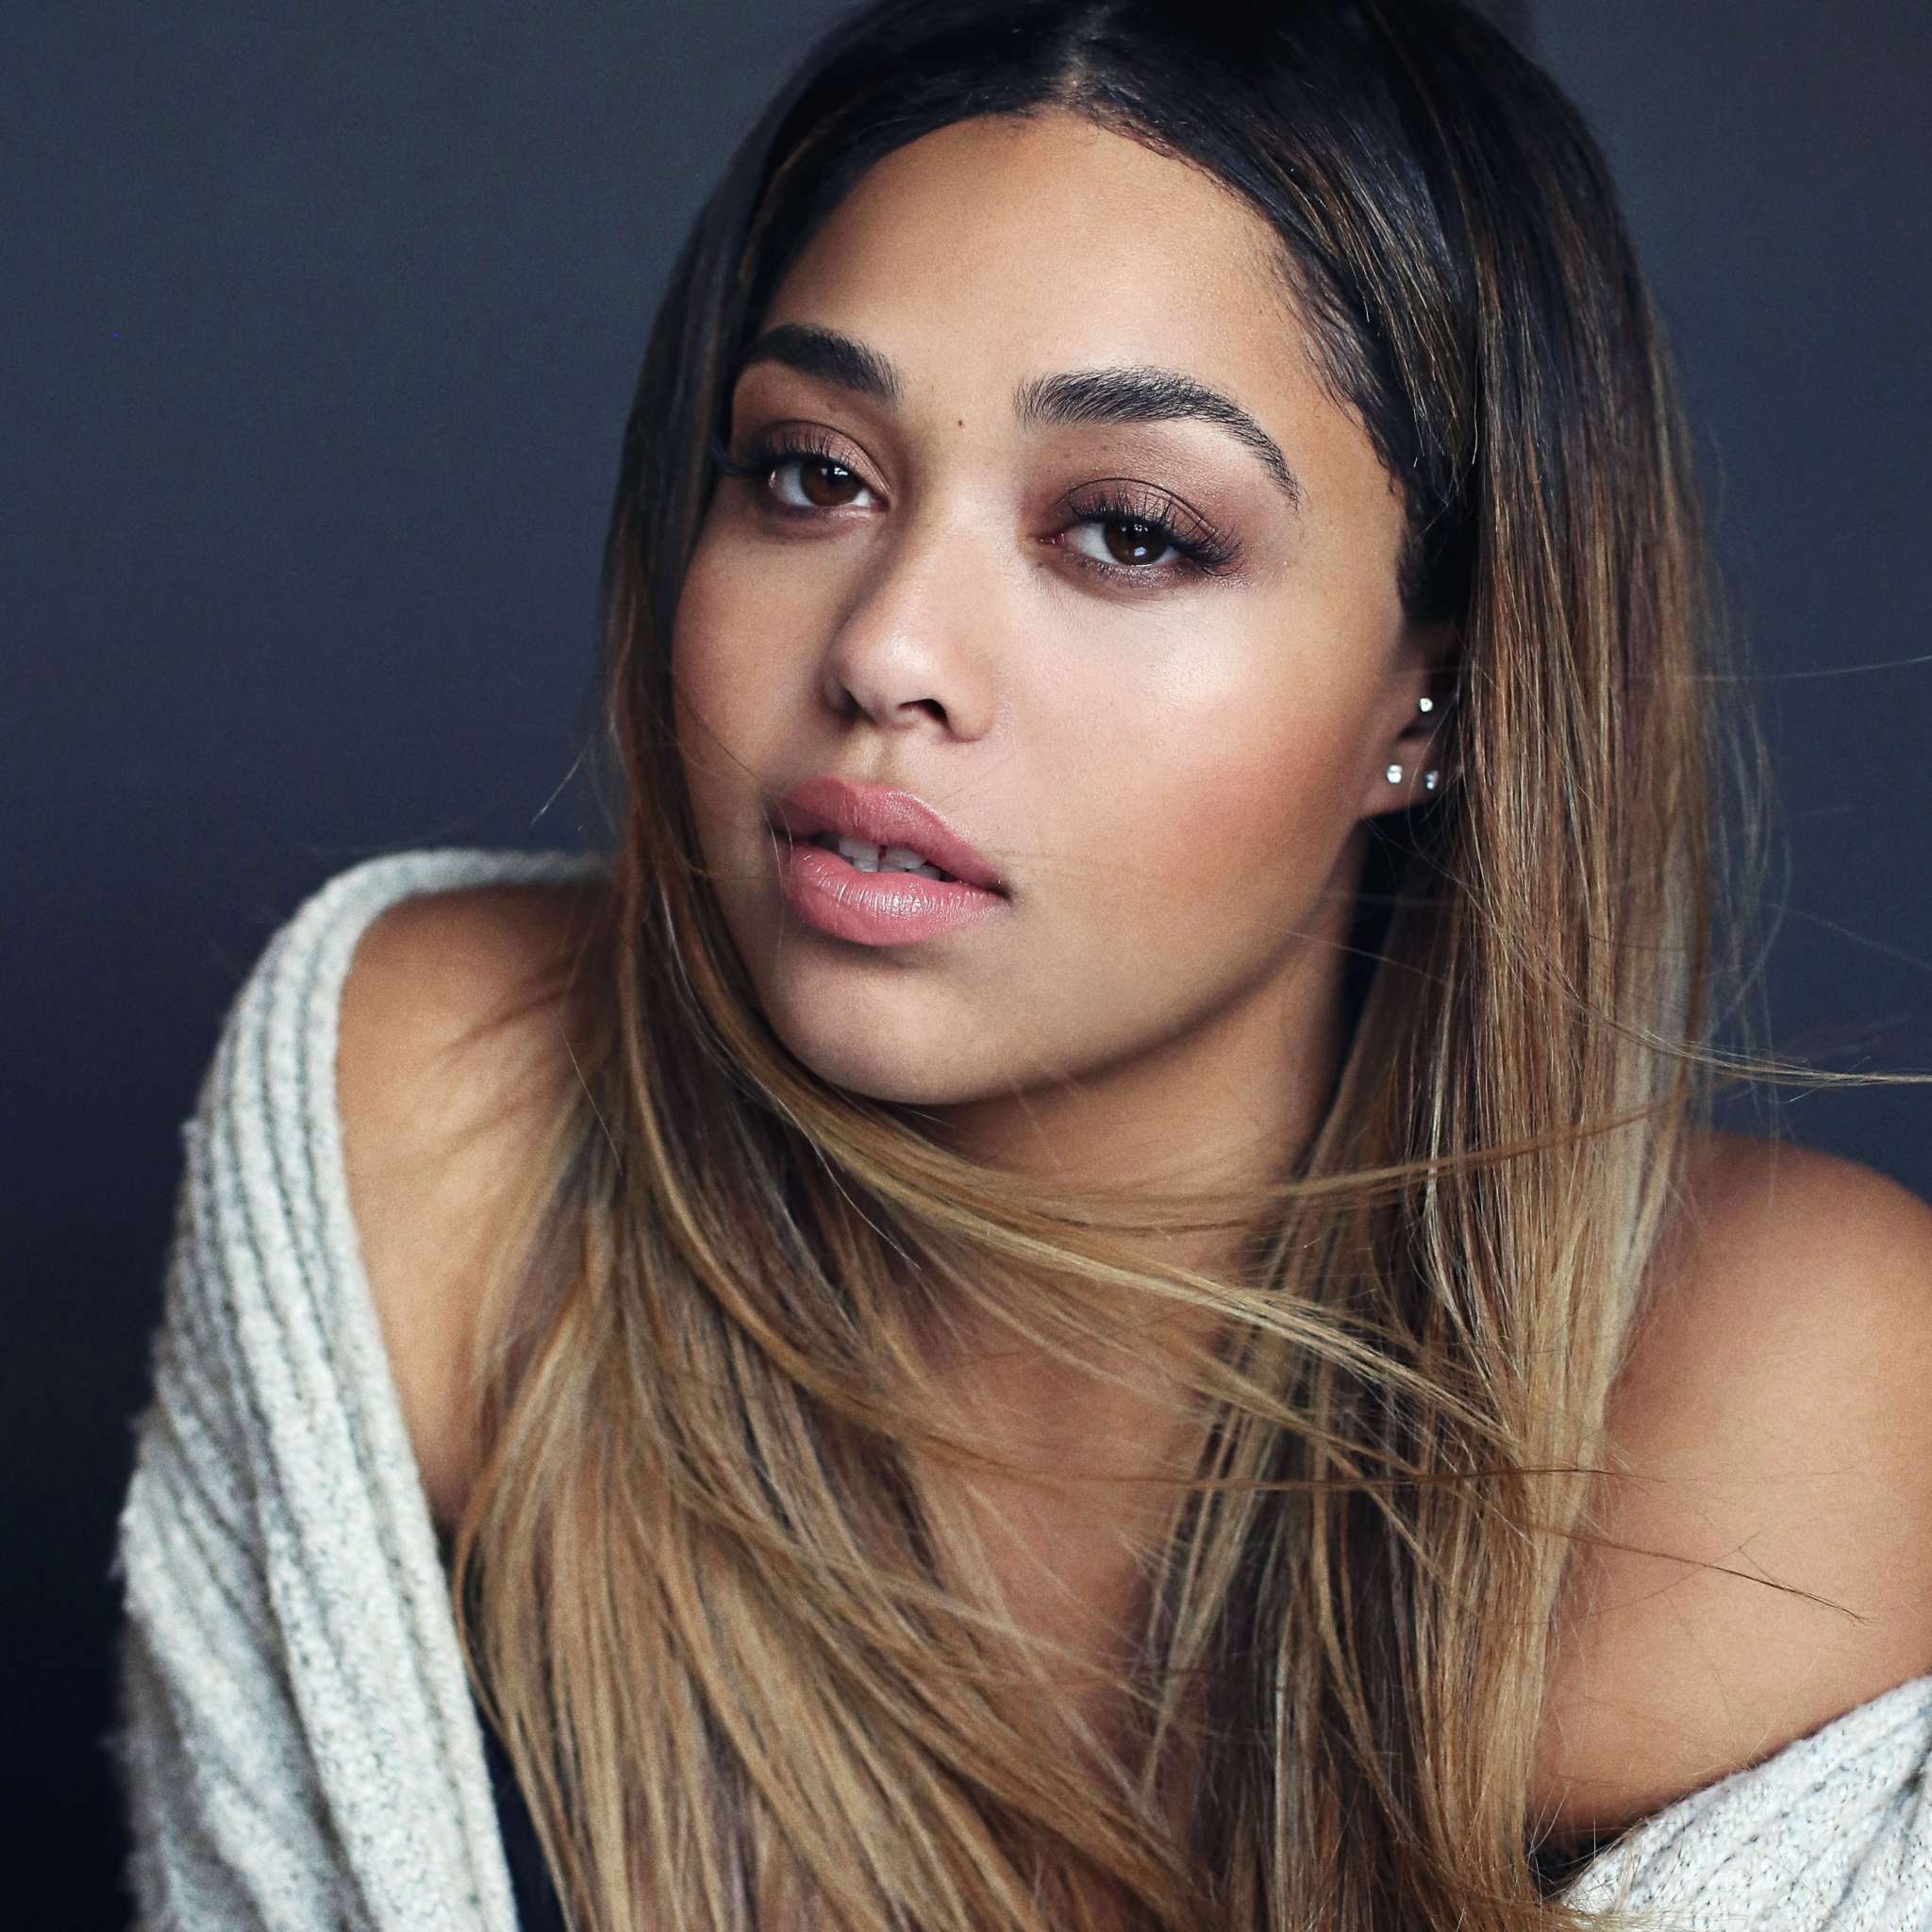 Jordyn Woods Shares New Pics From Her Home And Fans Go Crazy Over The Jaw-Dropping View